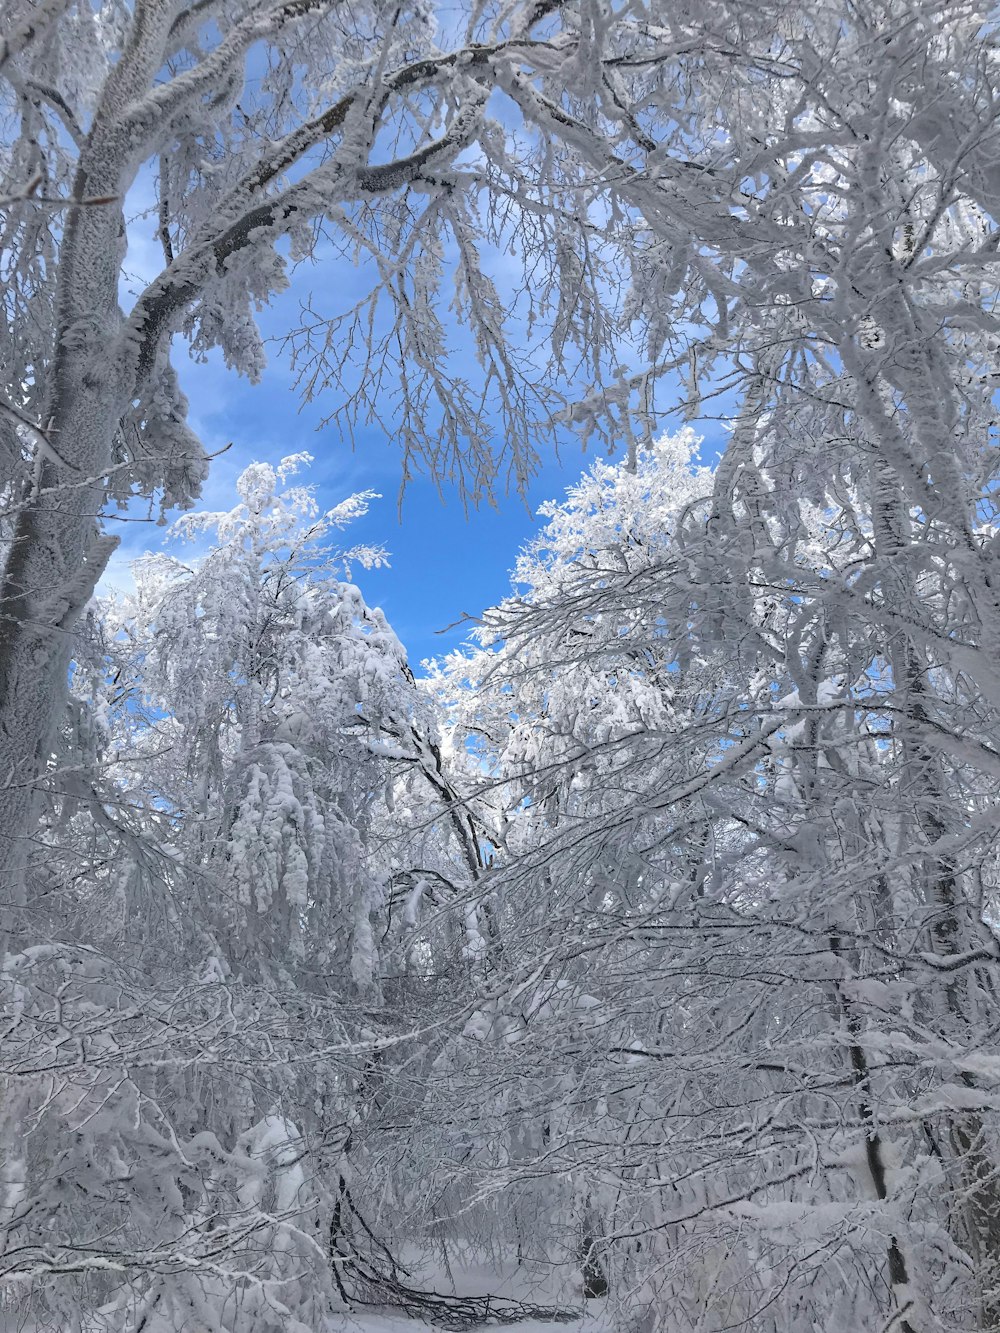 snow covered forest under blue sky at daytime